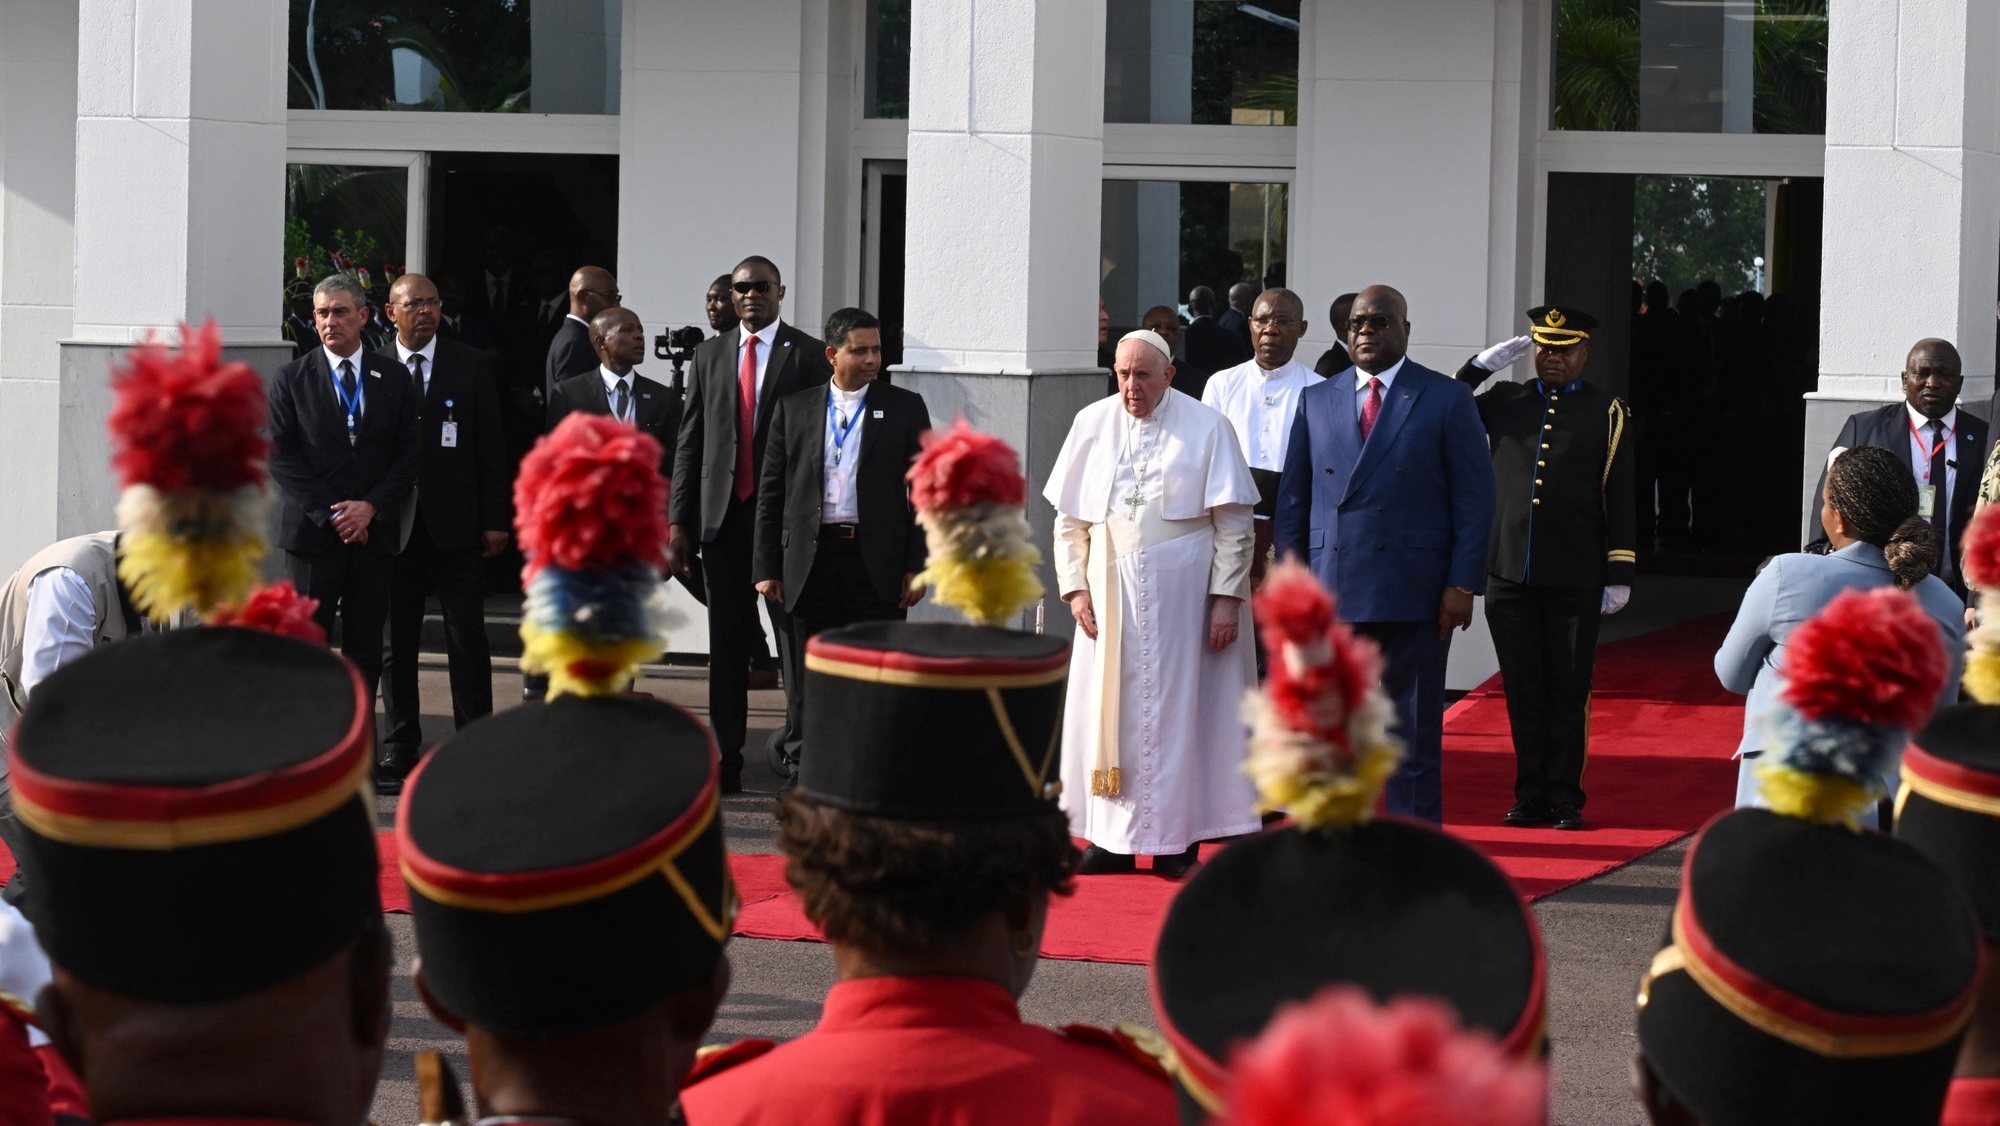 epa10441508 Pope Francis (C) with Congolese President Felix Tshisekedi (C-R) during a welcome ceremony at the Palais de la Nation in Kinshasa, Democratic Republic of Congo (DRC), 31 January 2023. Pope Francis arrived in Kinshasa as he begins his Apostolic Journey to the Democratic Republic of Congo from 31 January to 03 February. He will then travel to South Sudan for an ecumenical peace pilgrimage from 03 to 05 February.  EPA/CIRO FUSCO